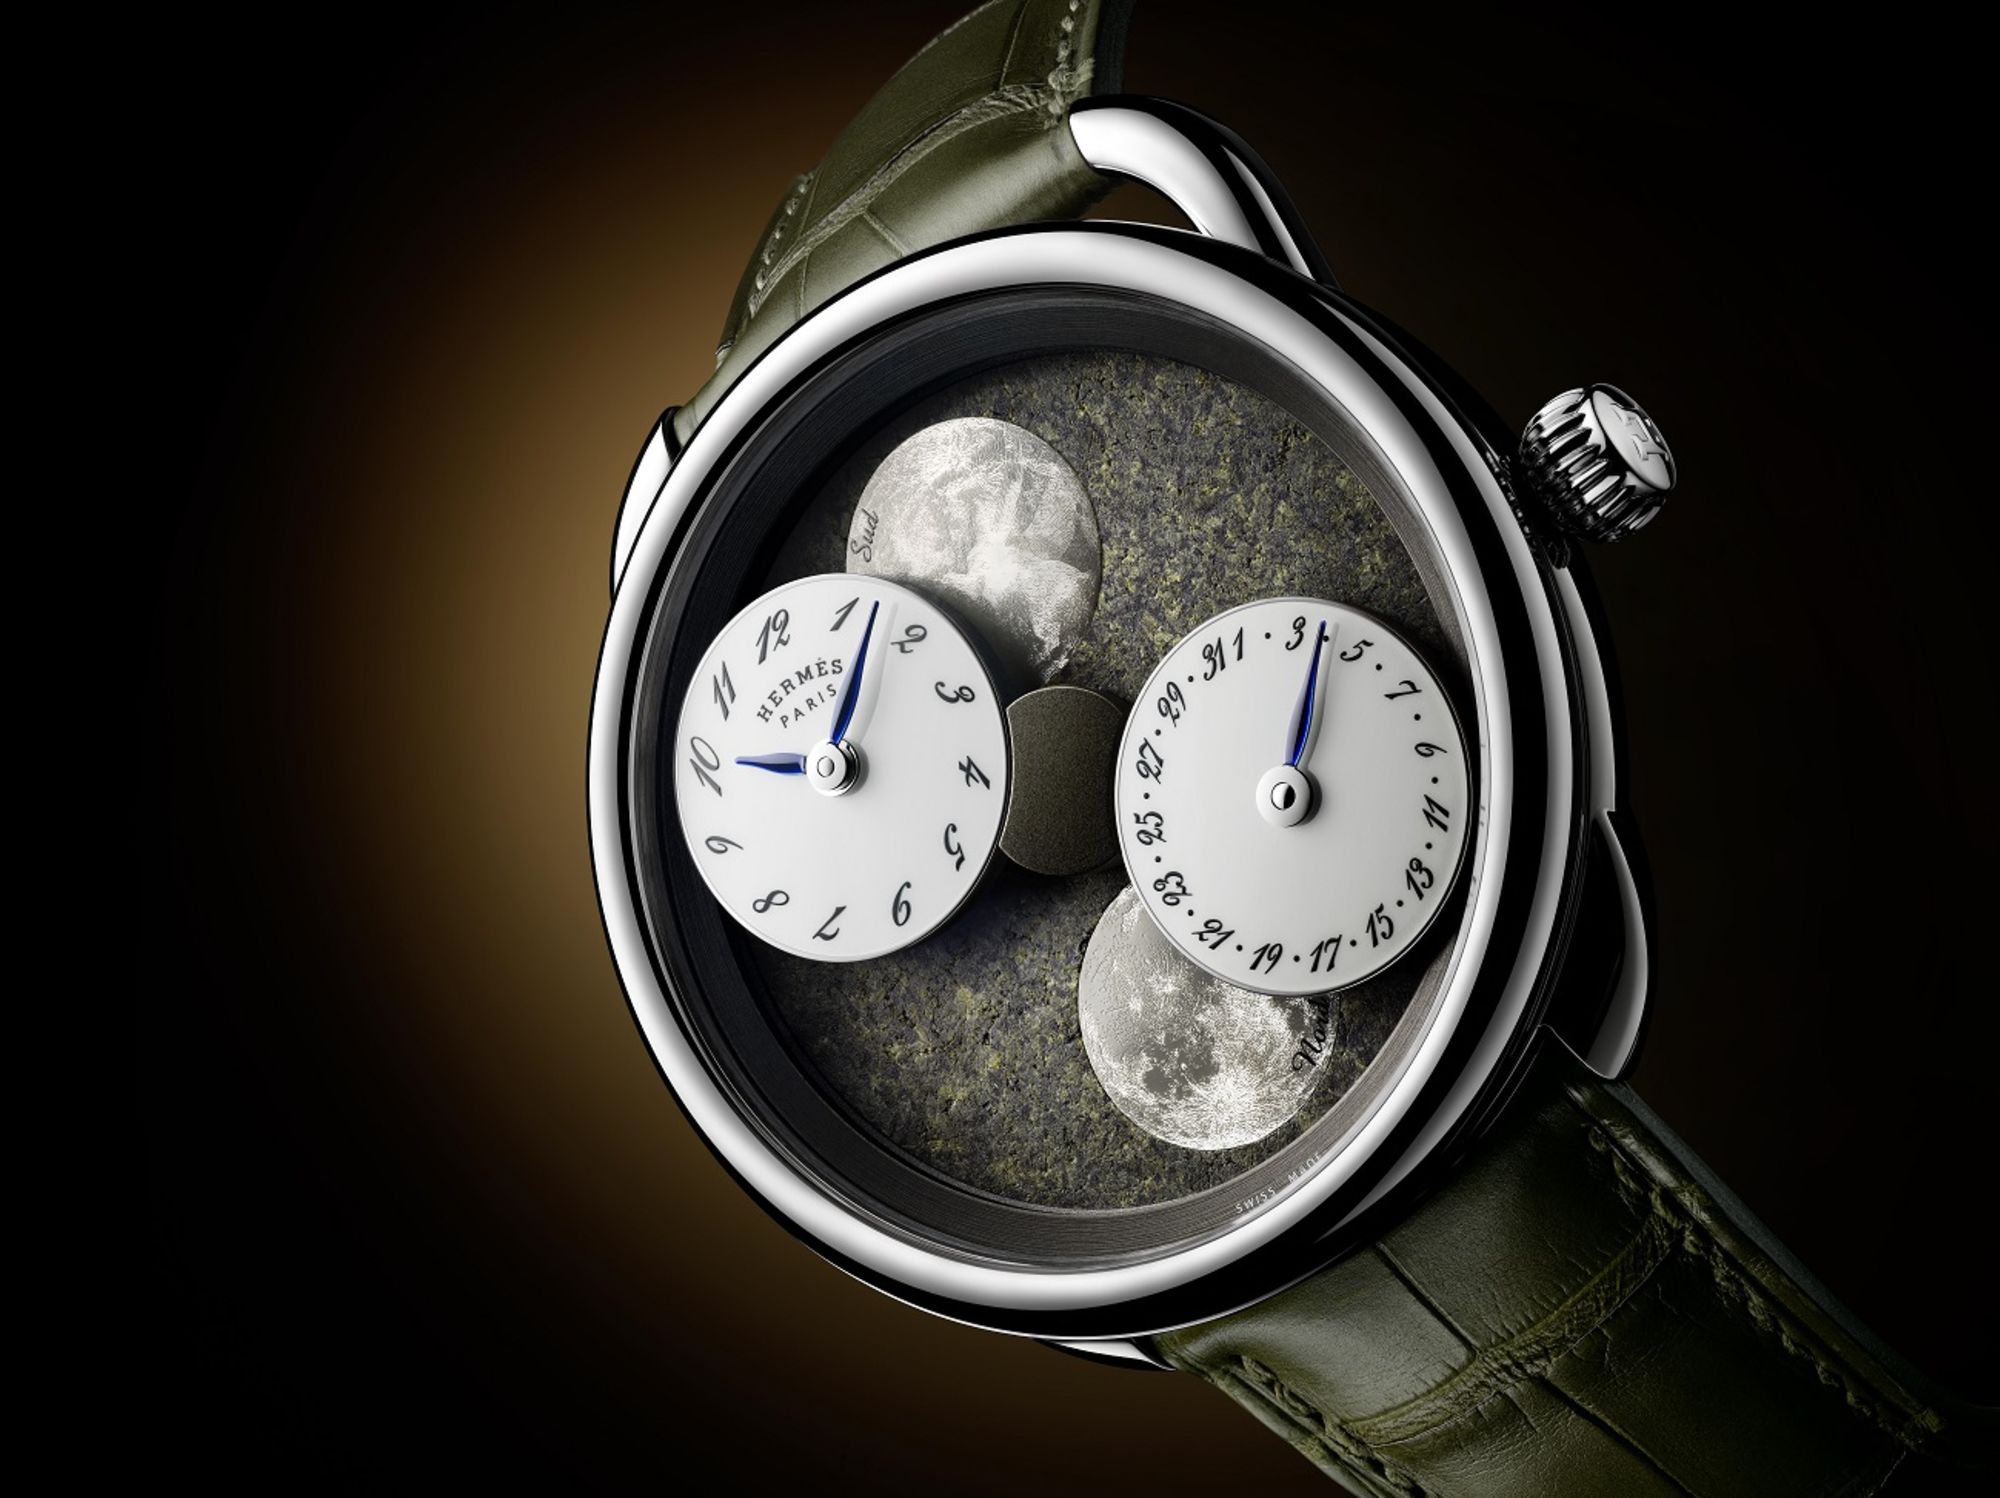 Recommended Reading: 'The Wizard of Swiss Watchmaking